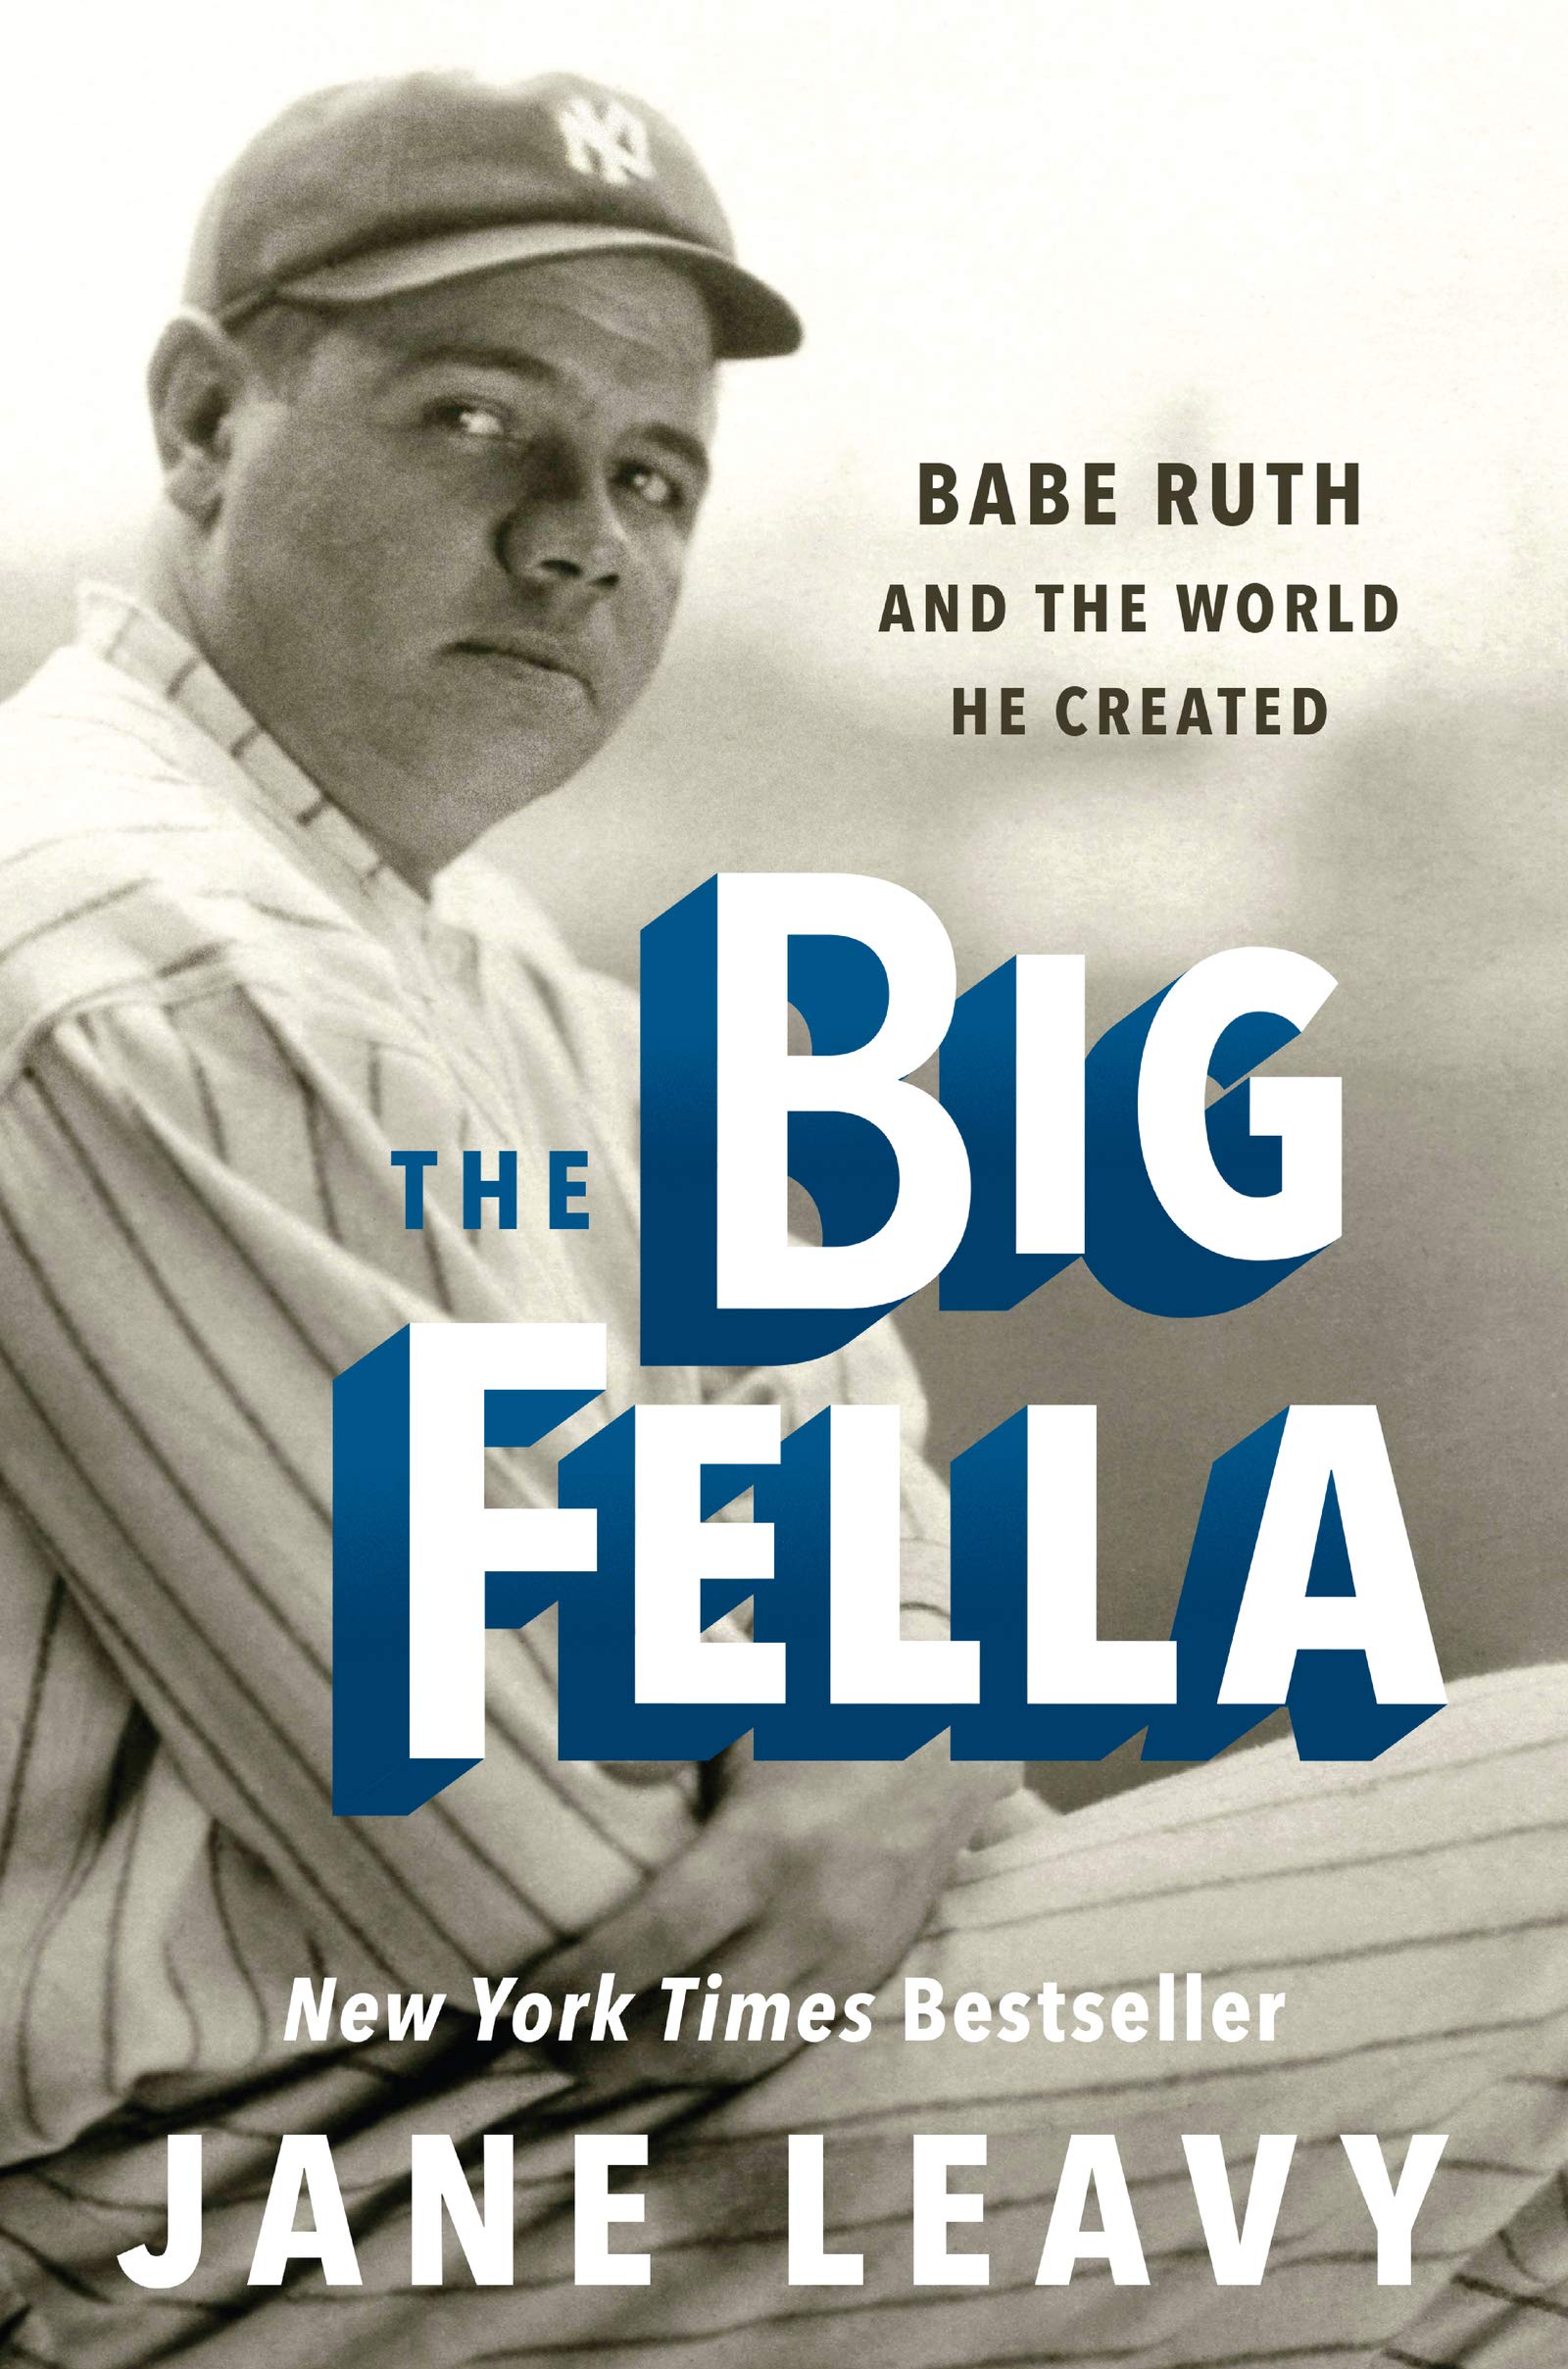 A book cover for The Big Fella: Babe Ruth and the World He Created